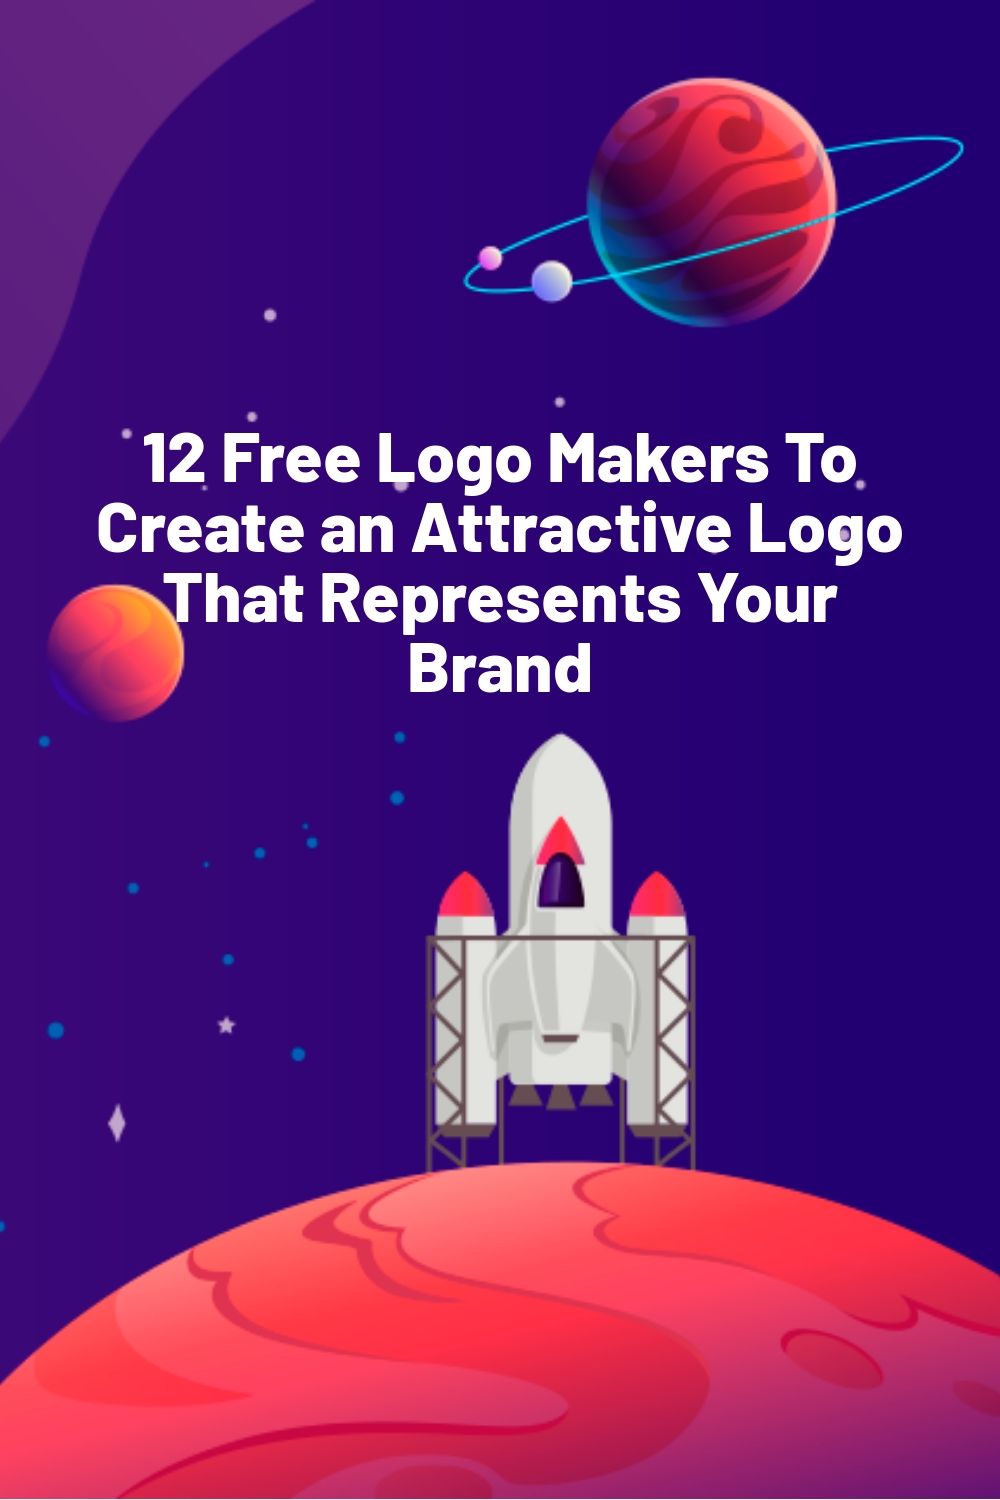 12 Free Logo Makers To Create an Attractive Logo That Represents Your Brand